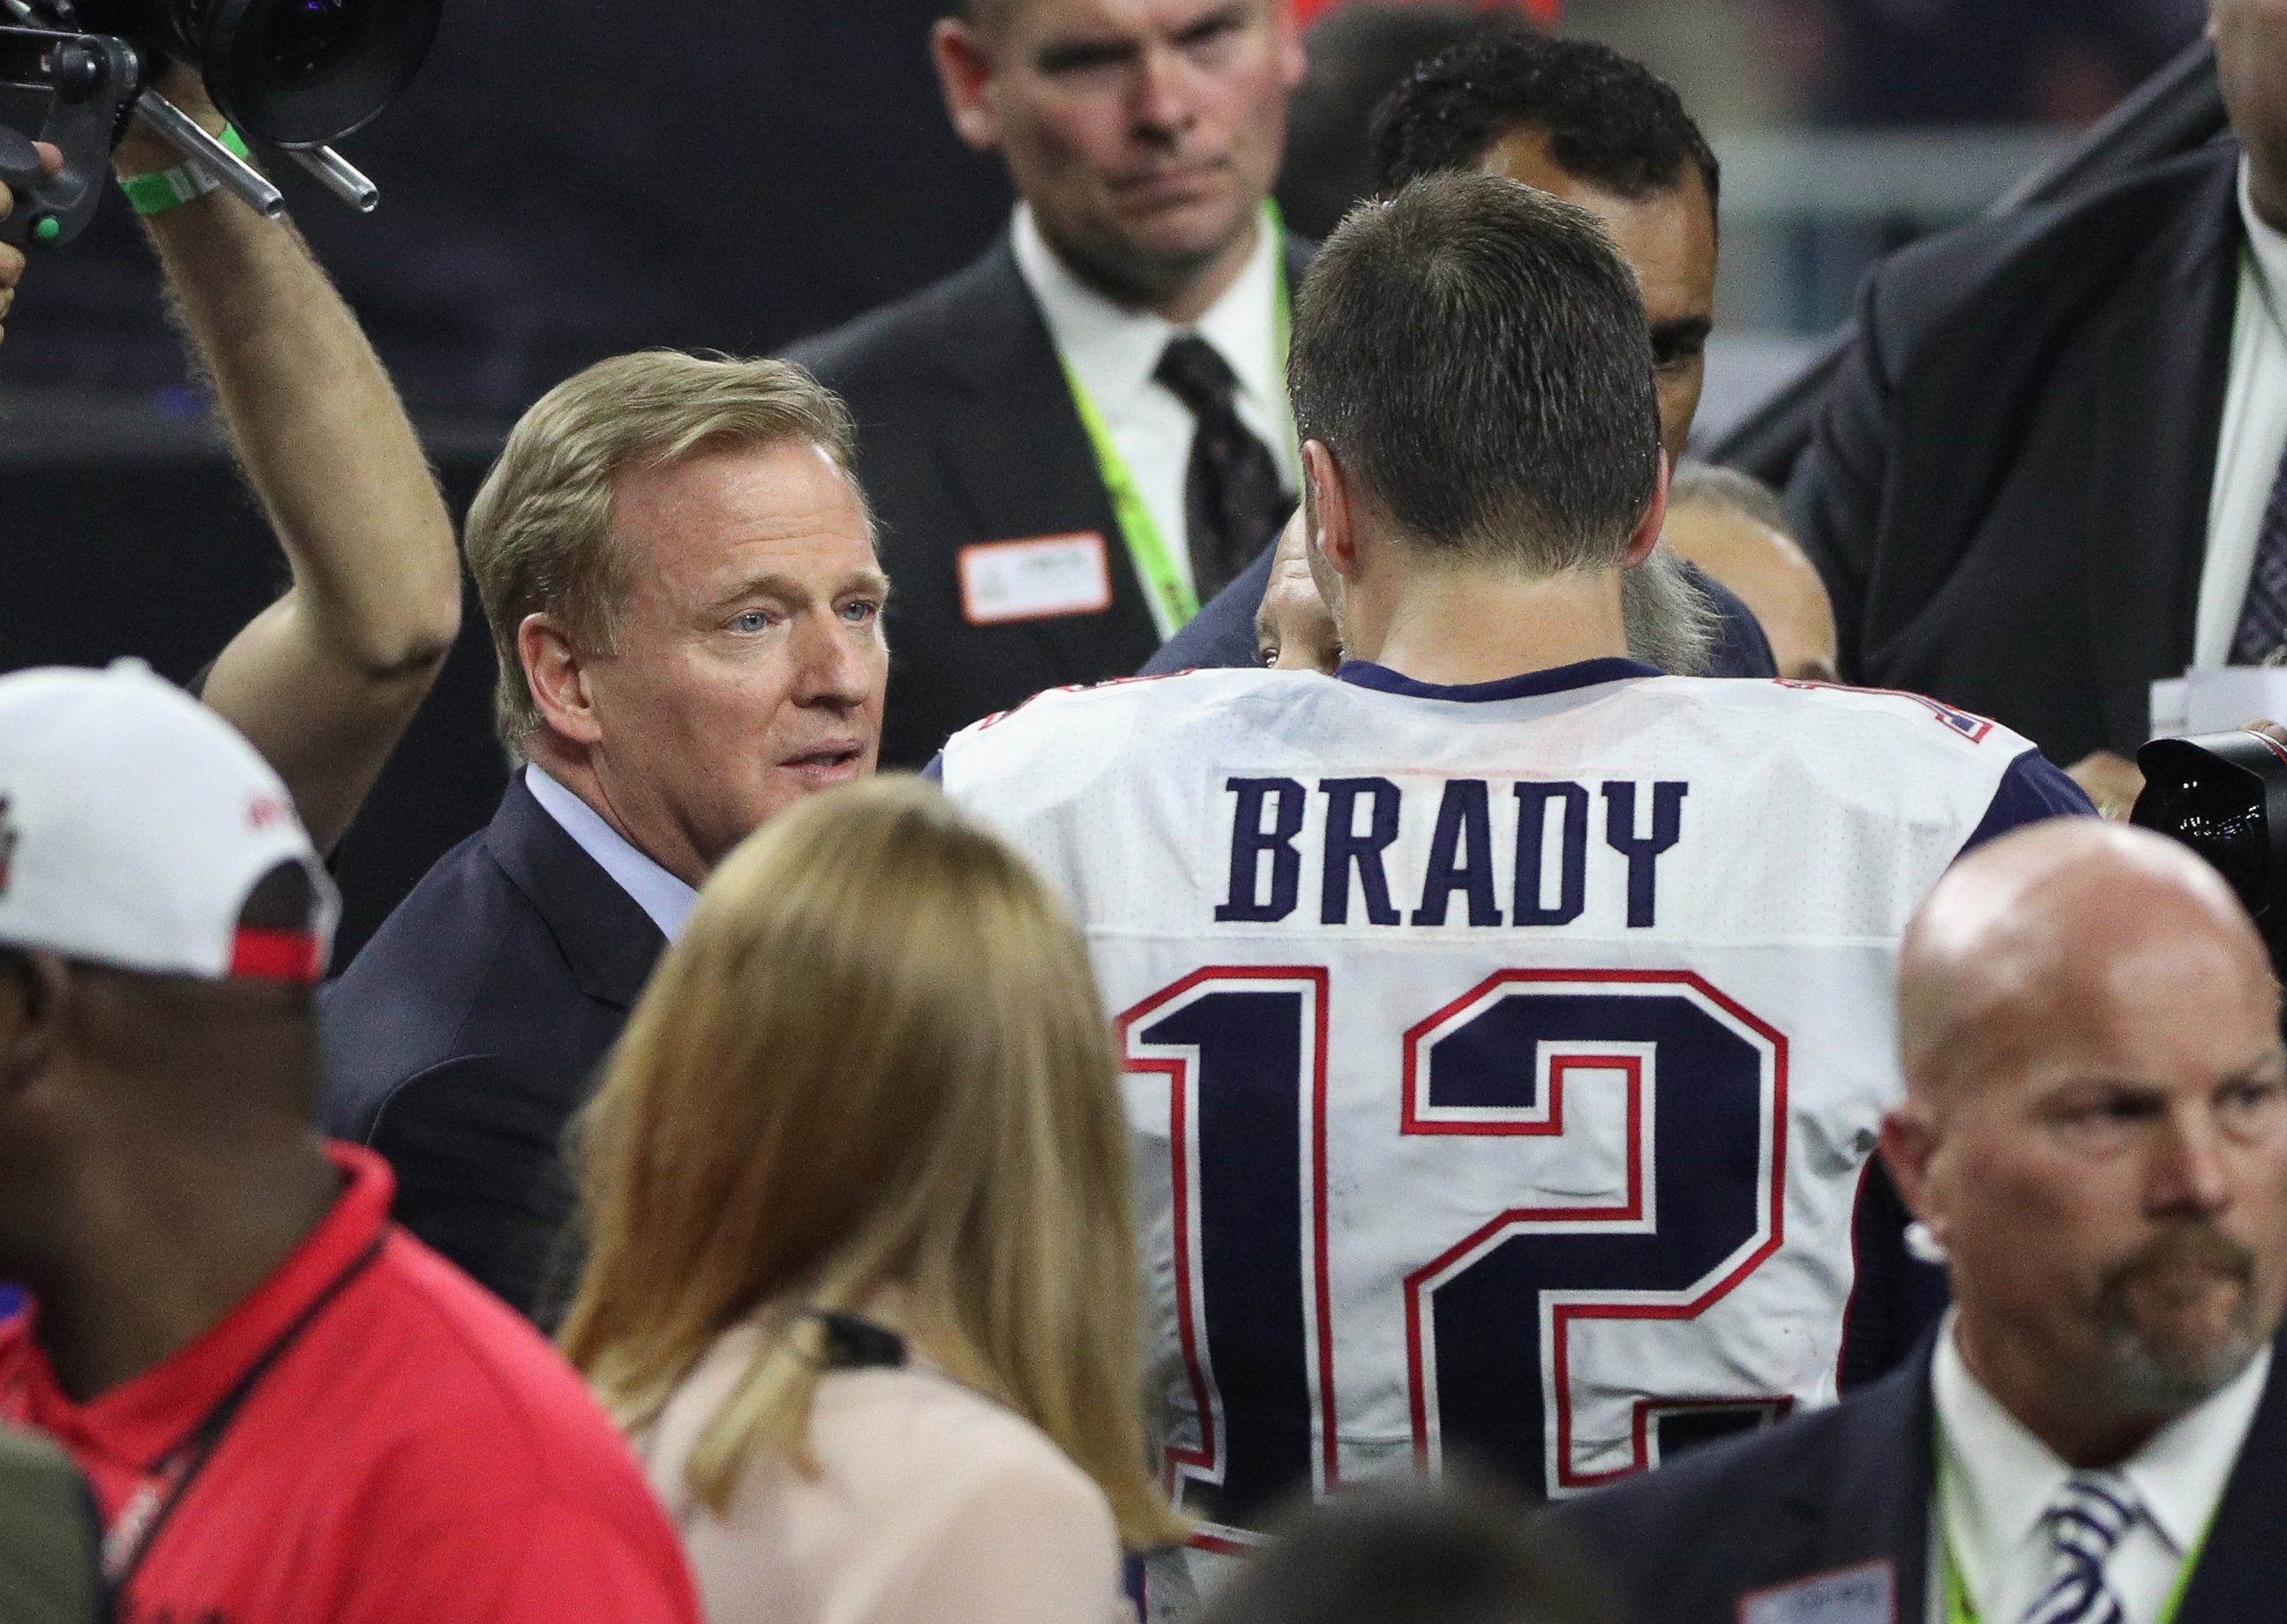 PHOTO: NFL commissioner Roger Goodell speaks to Tom Brady of the New England Patriots after defeating the Atlanta Falcons during Super Bowl 51 at NRG Stadium in Houston, Feb. 5, 2017. 